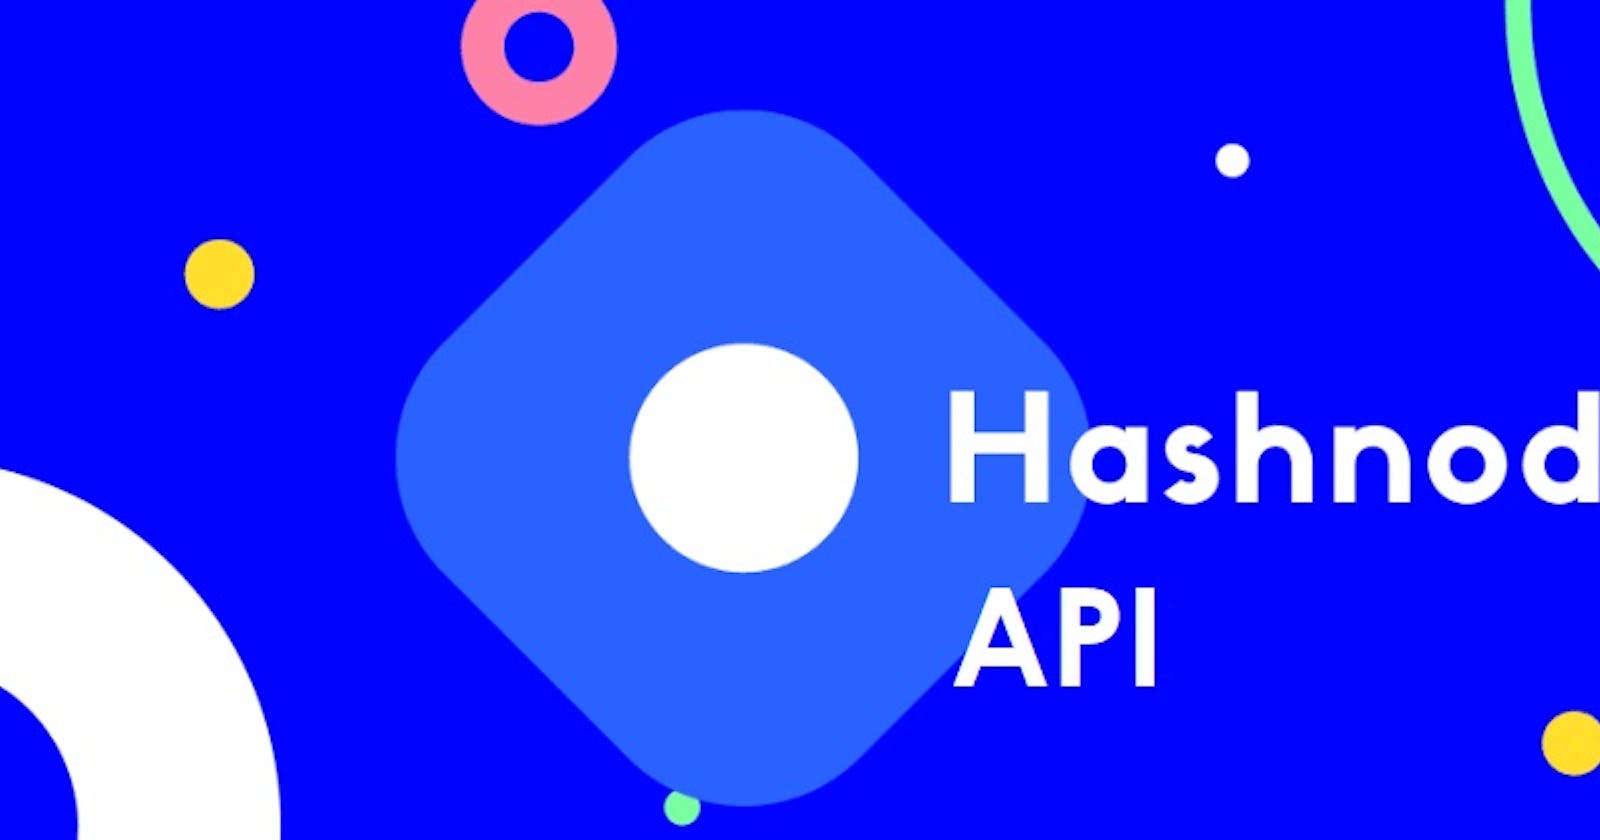 Get started with the Hashnode API